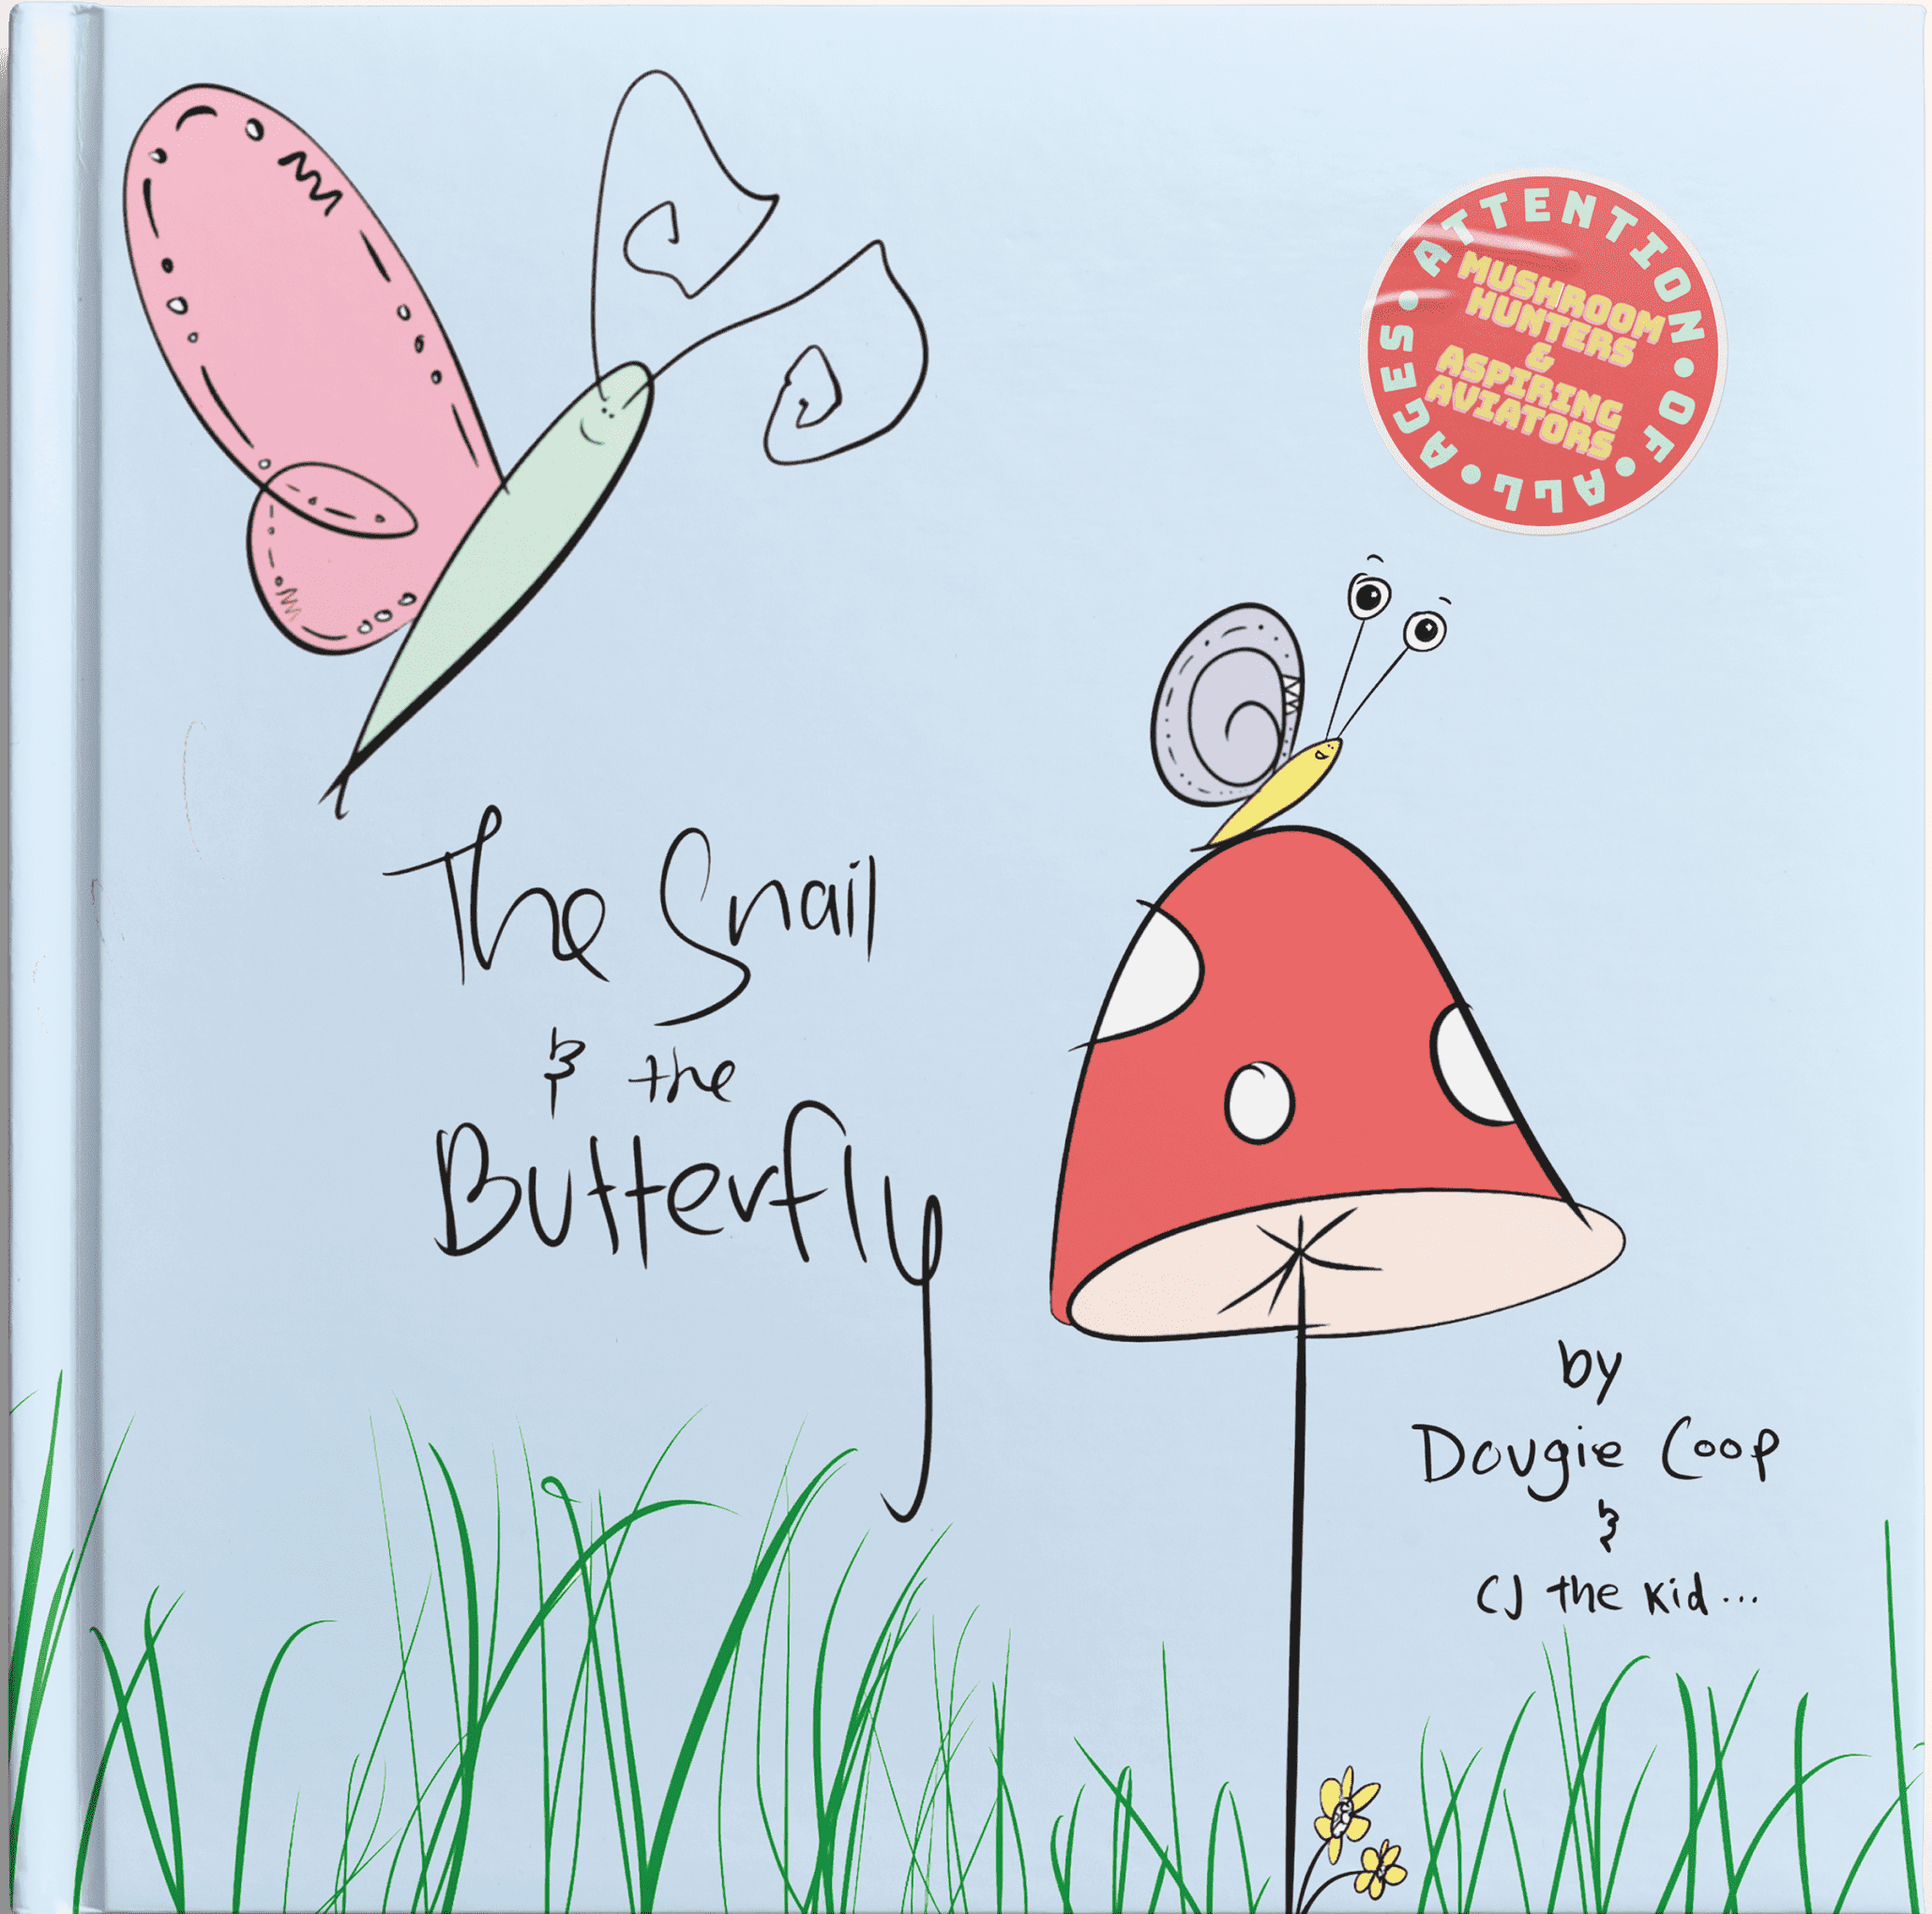 The Snail & Butterfly Cover - Children's Book by Dougie Coop & CJ the Kid